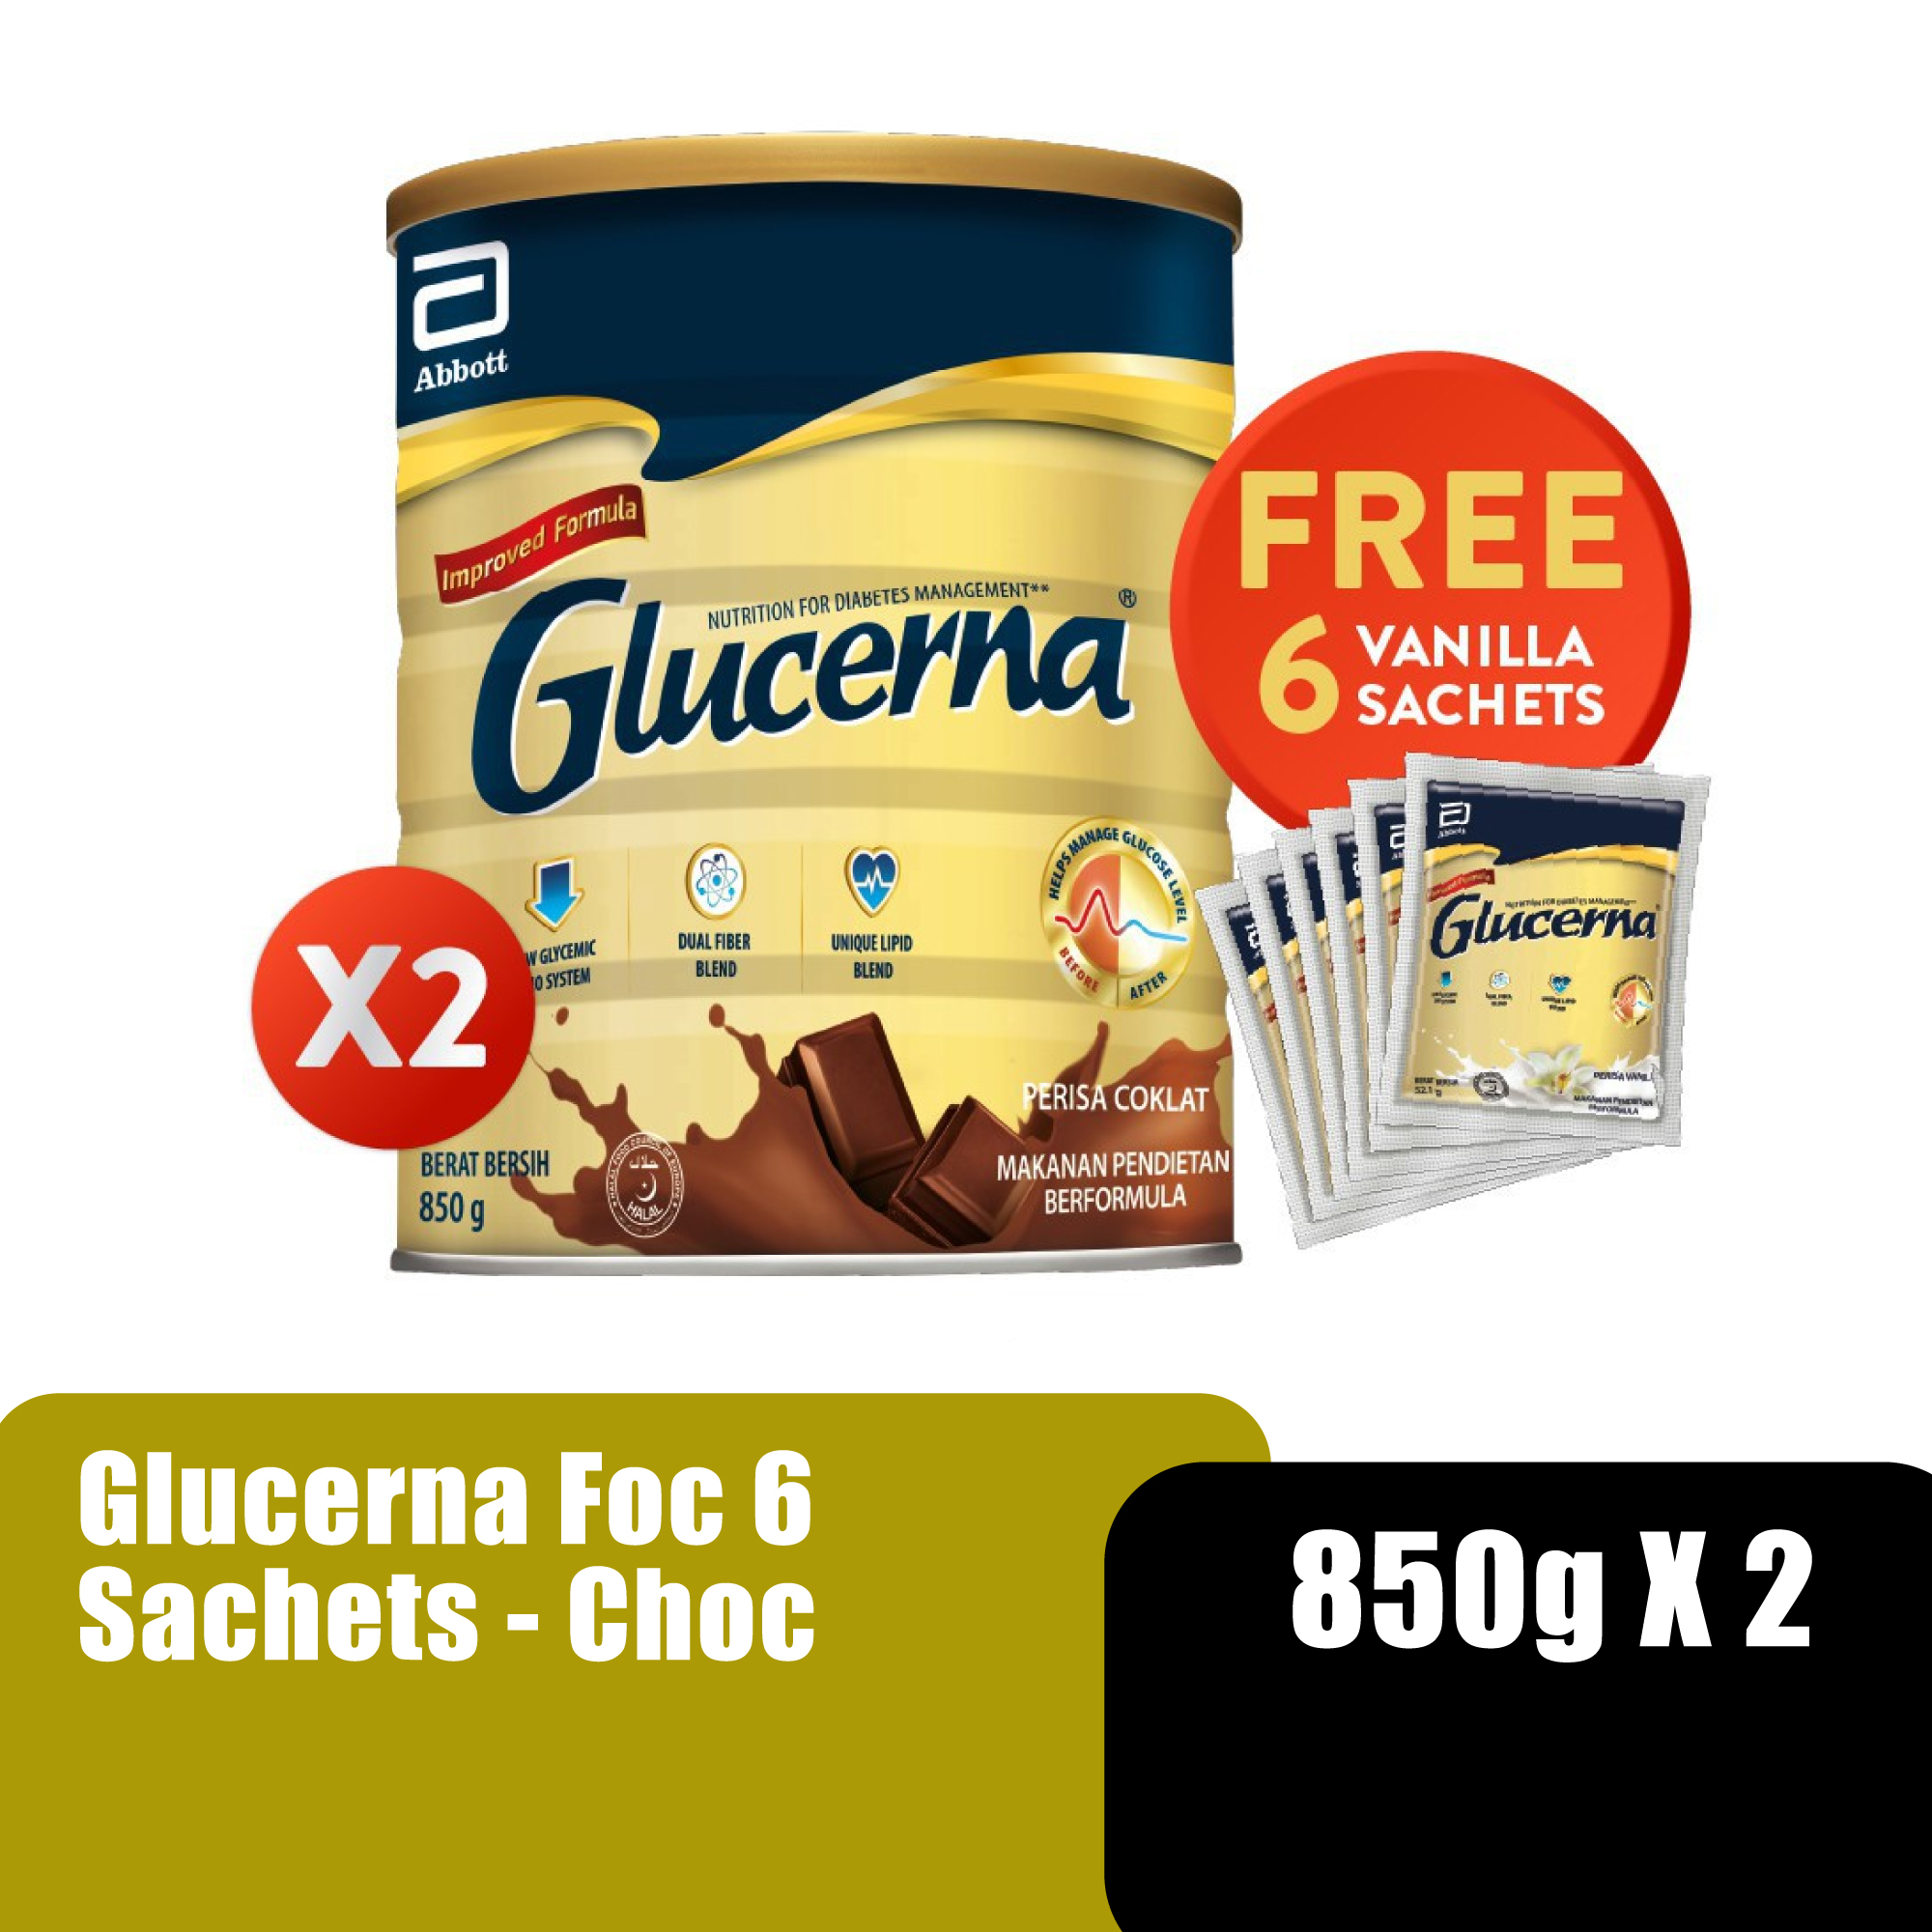 Glucerna Chocolate Milk, Diabetic Milk as Meal Replacement and in Tube Feeding Formula - 800g x 2 [FOC 6 Sachets]